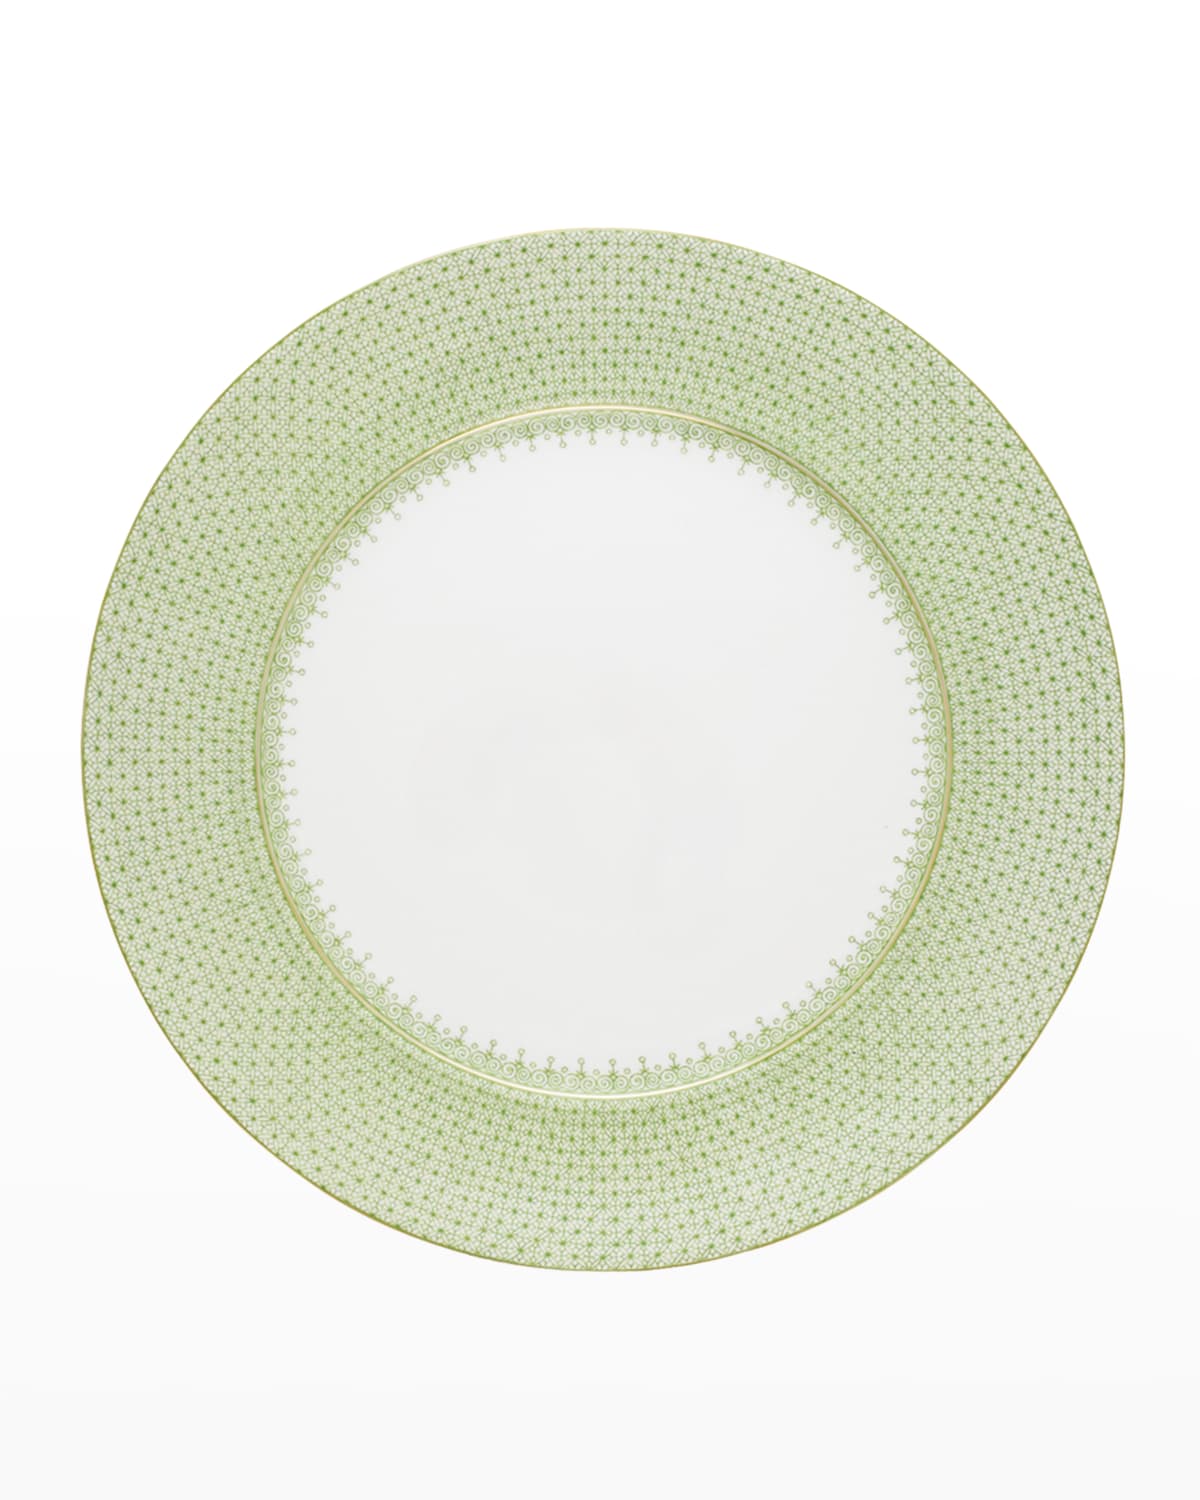 Mottahedeh Green Apple Charger Plate